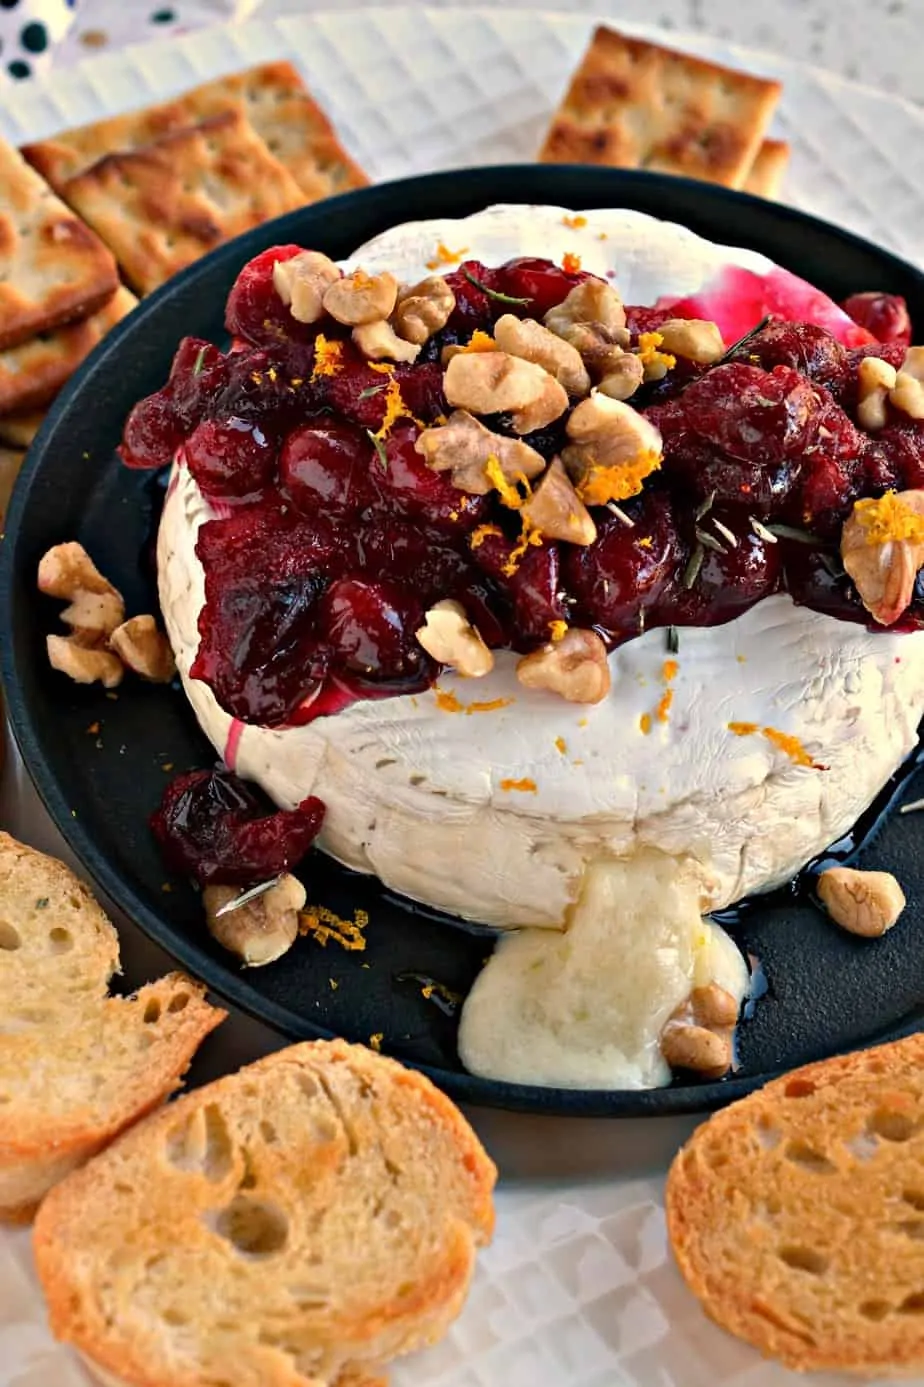 Never in the history of appetizers has there been a more elegant or easier recipe than this Baked Brie with cranberries.